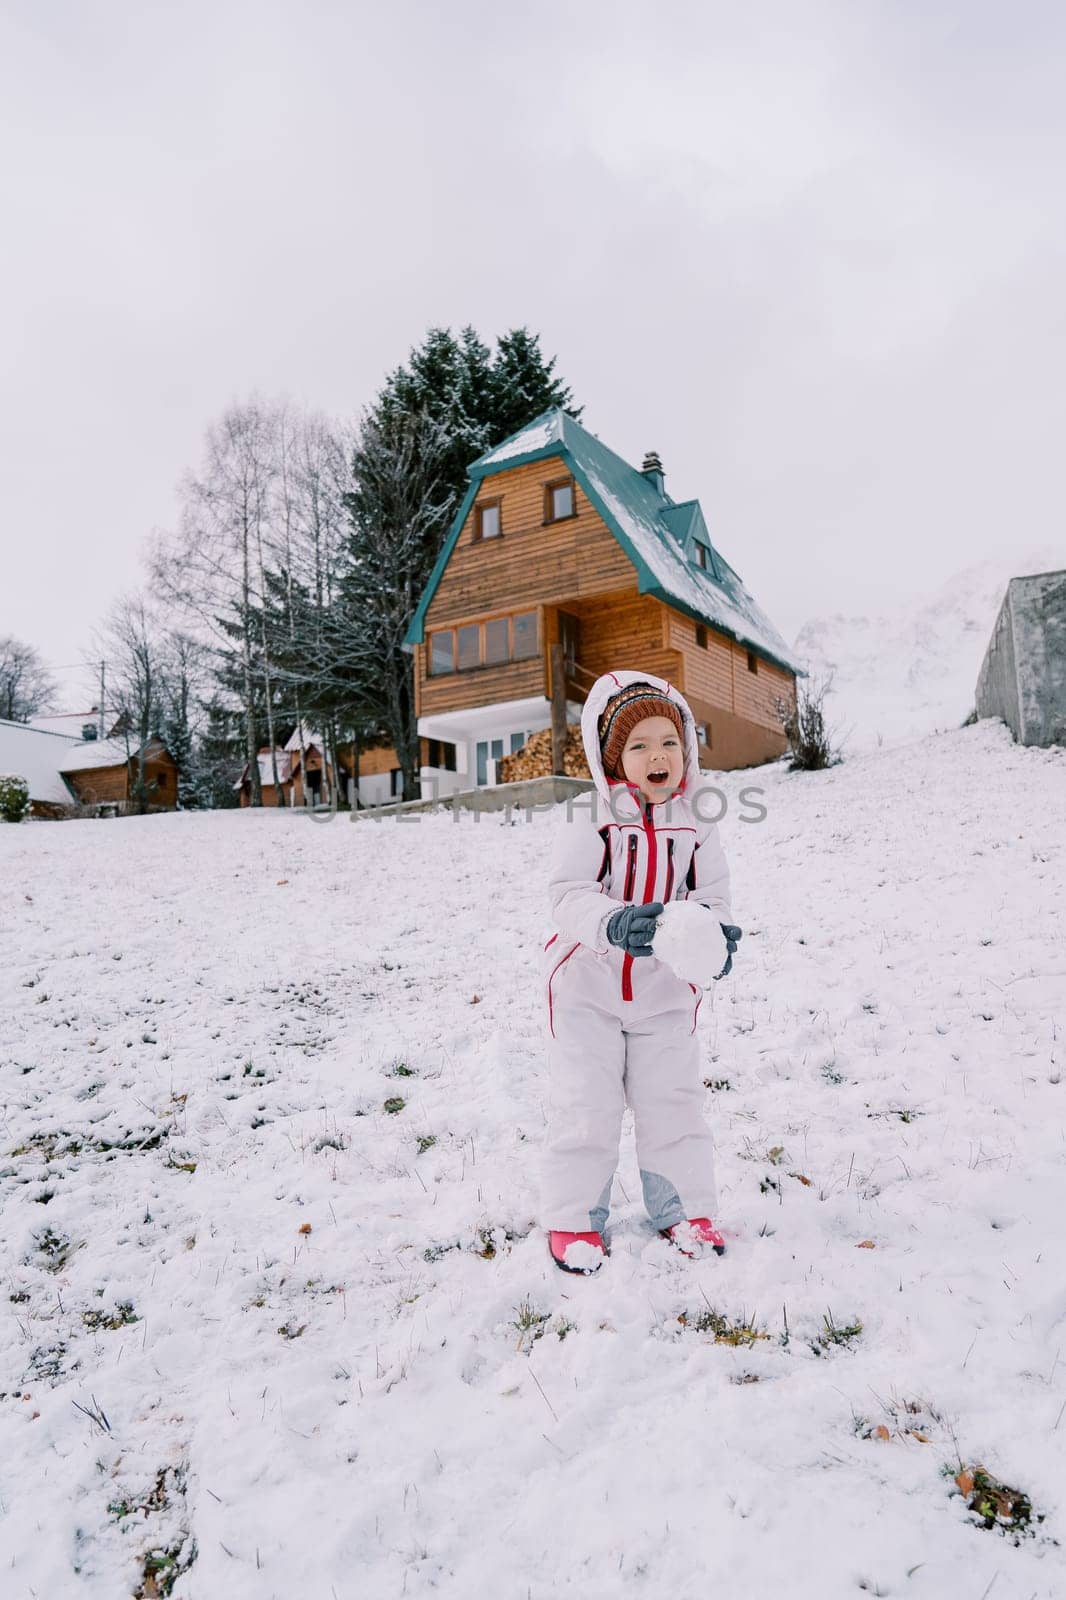 Little laughing girl with a snowball in her hands stands on a snowy slope near a wooden house. High quality photo